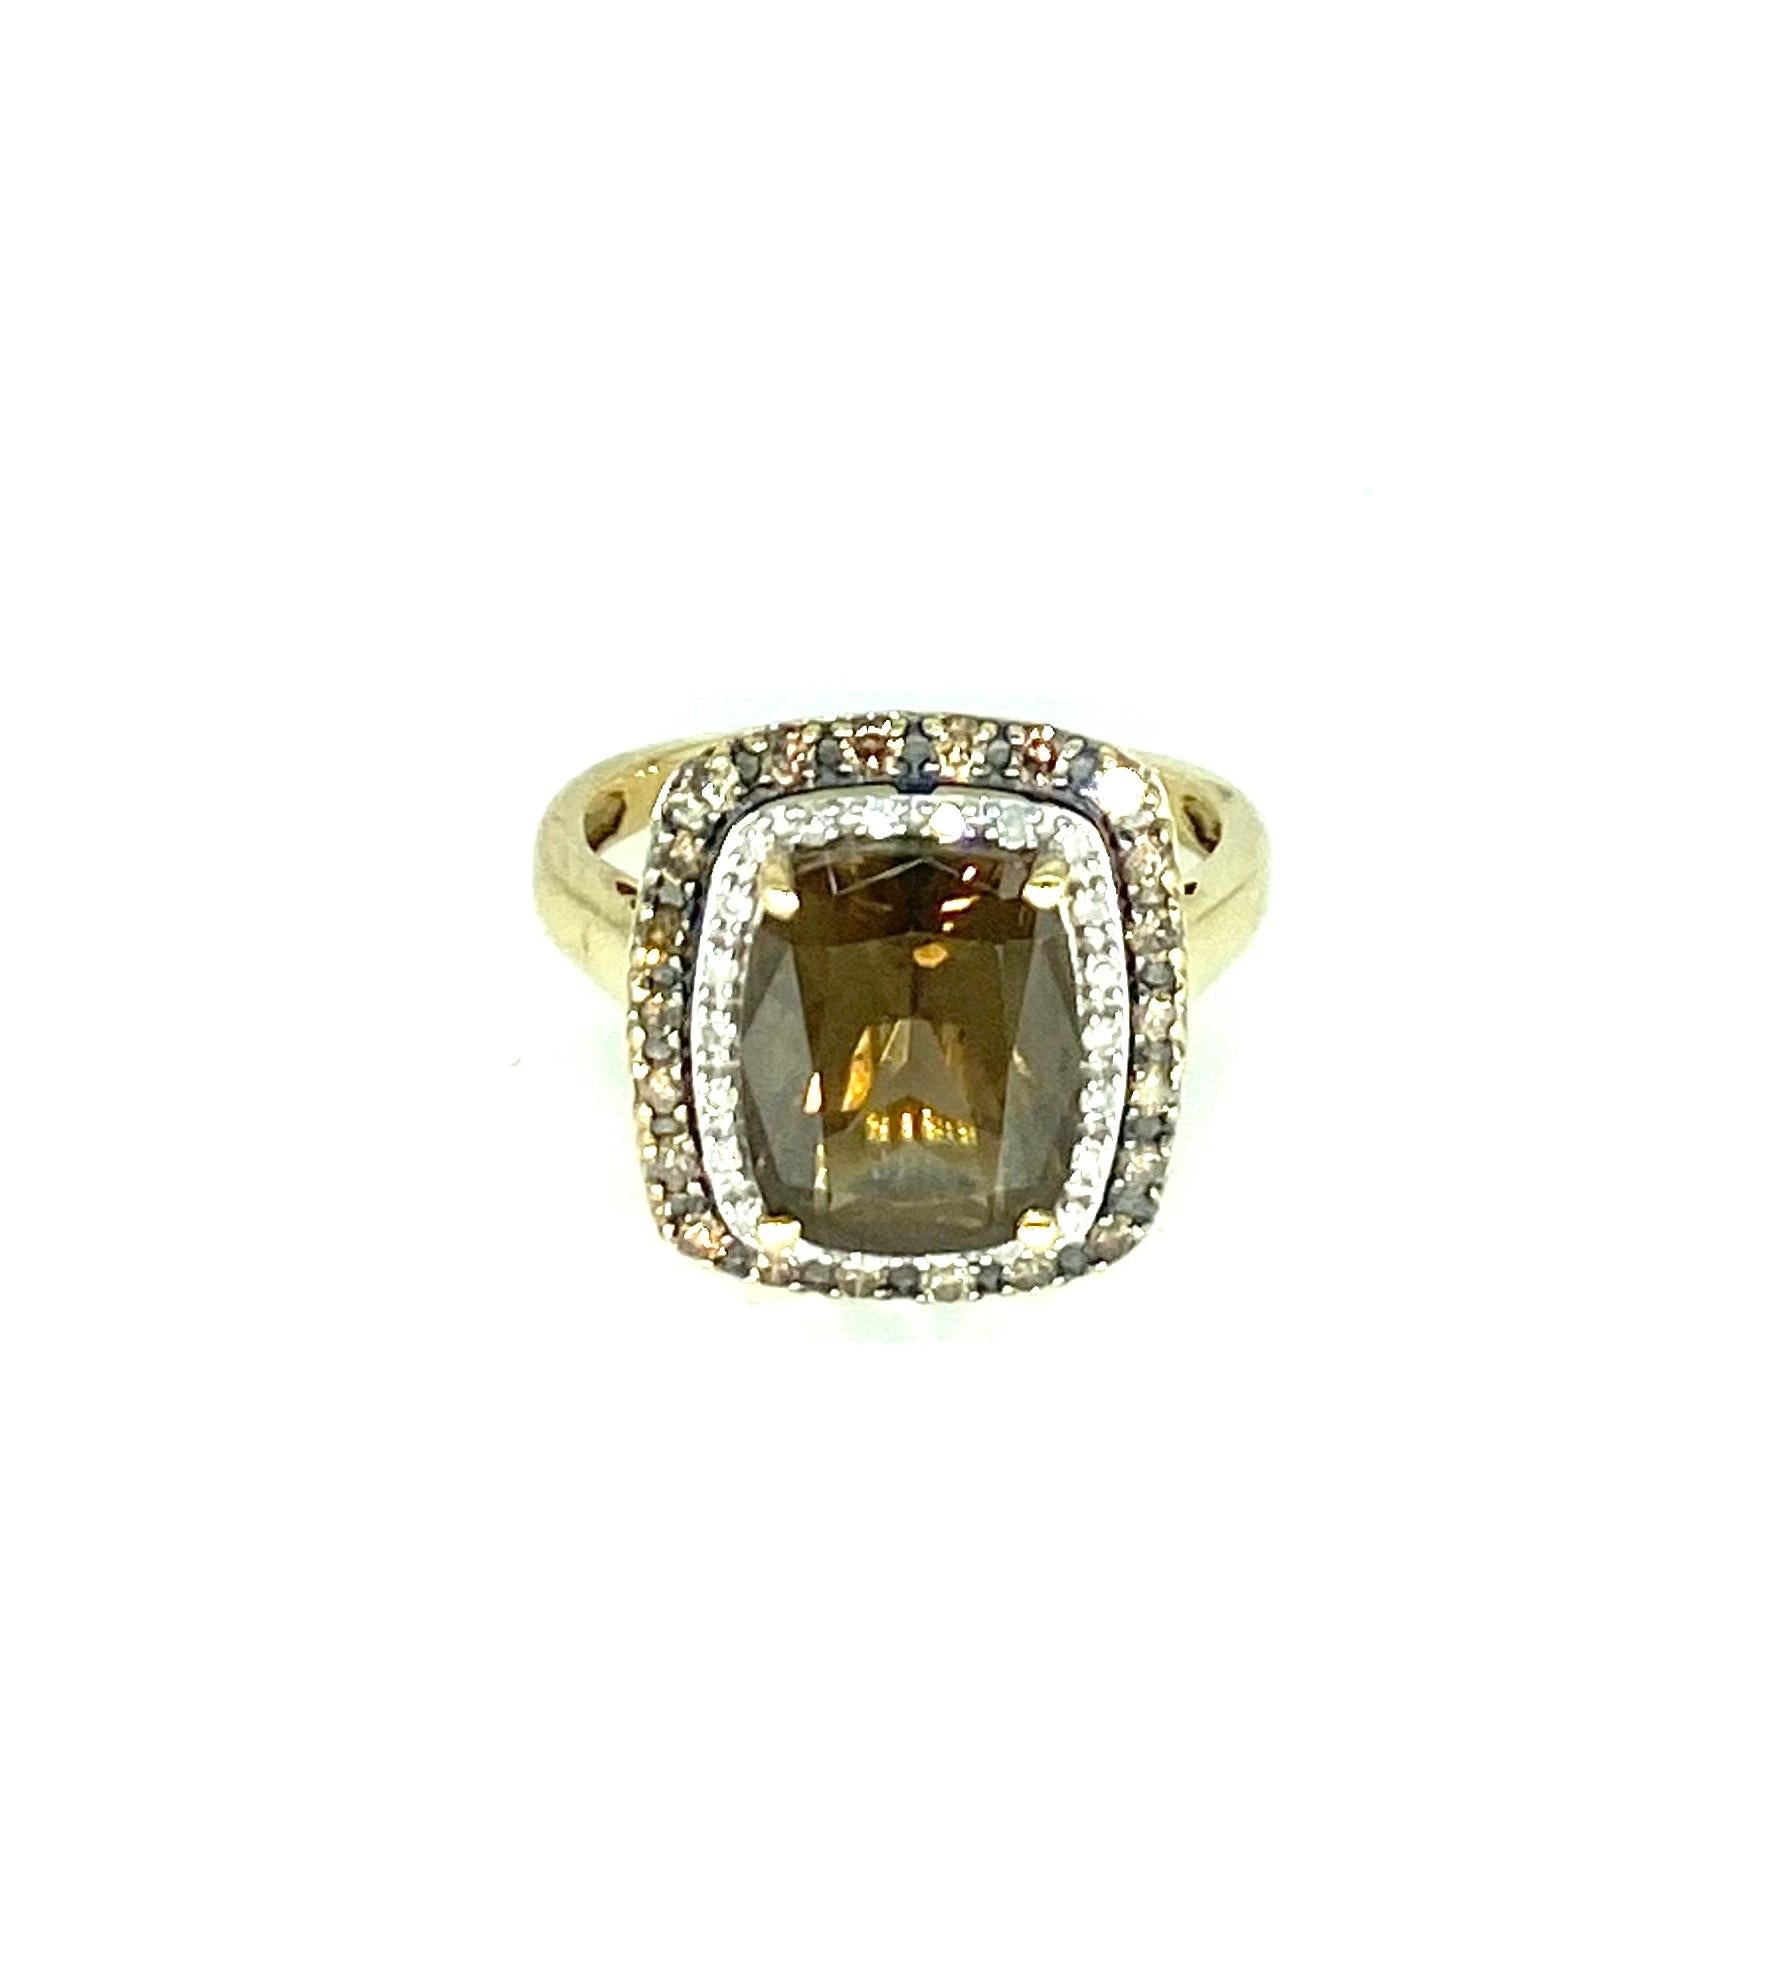 Vintage 3.50 Carat Smokey Quartz with White & Fancy Brown Diamonds Cluster Ring For Sale 2